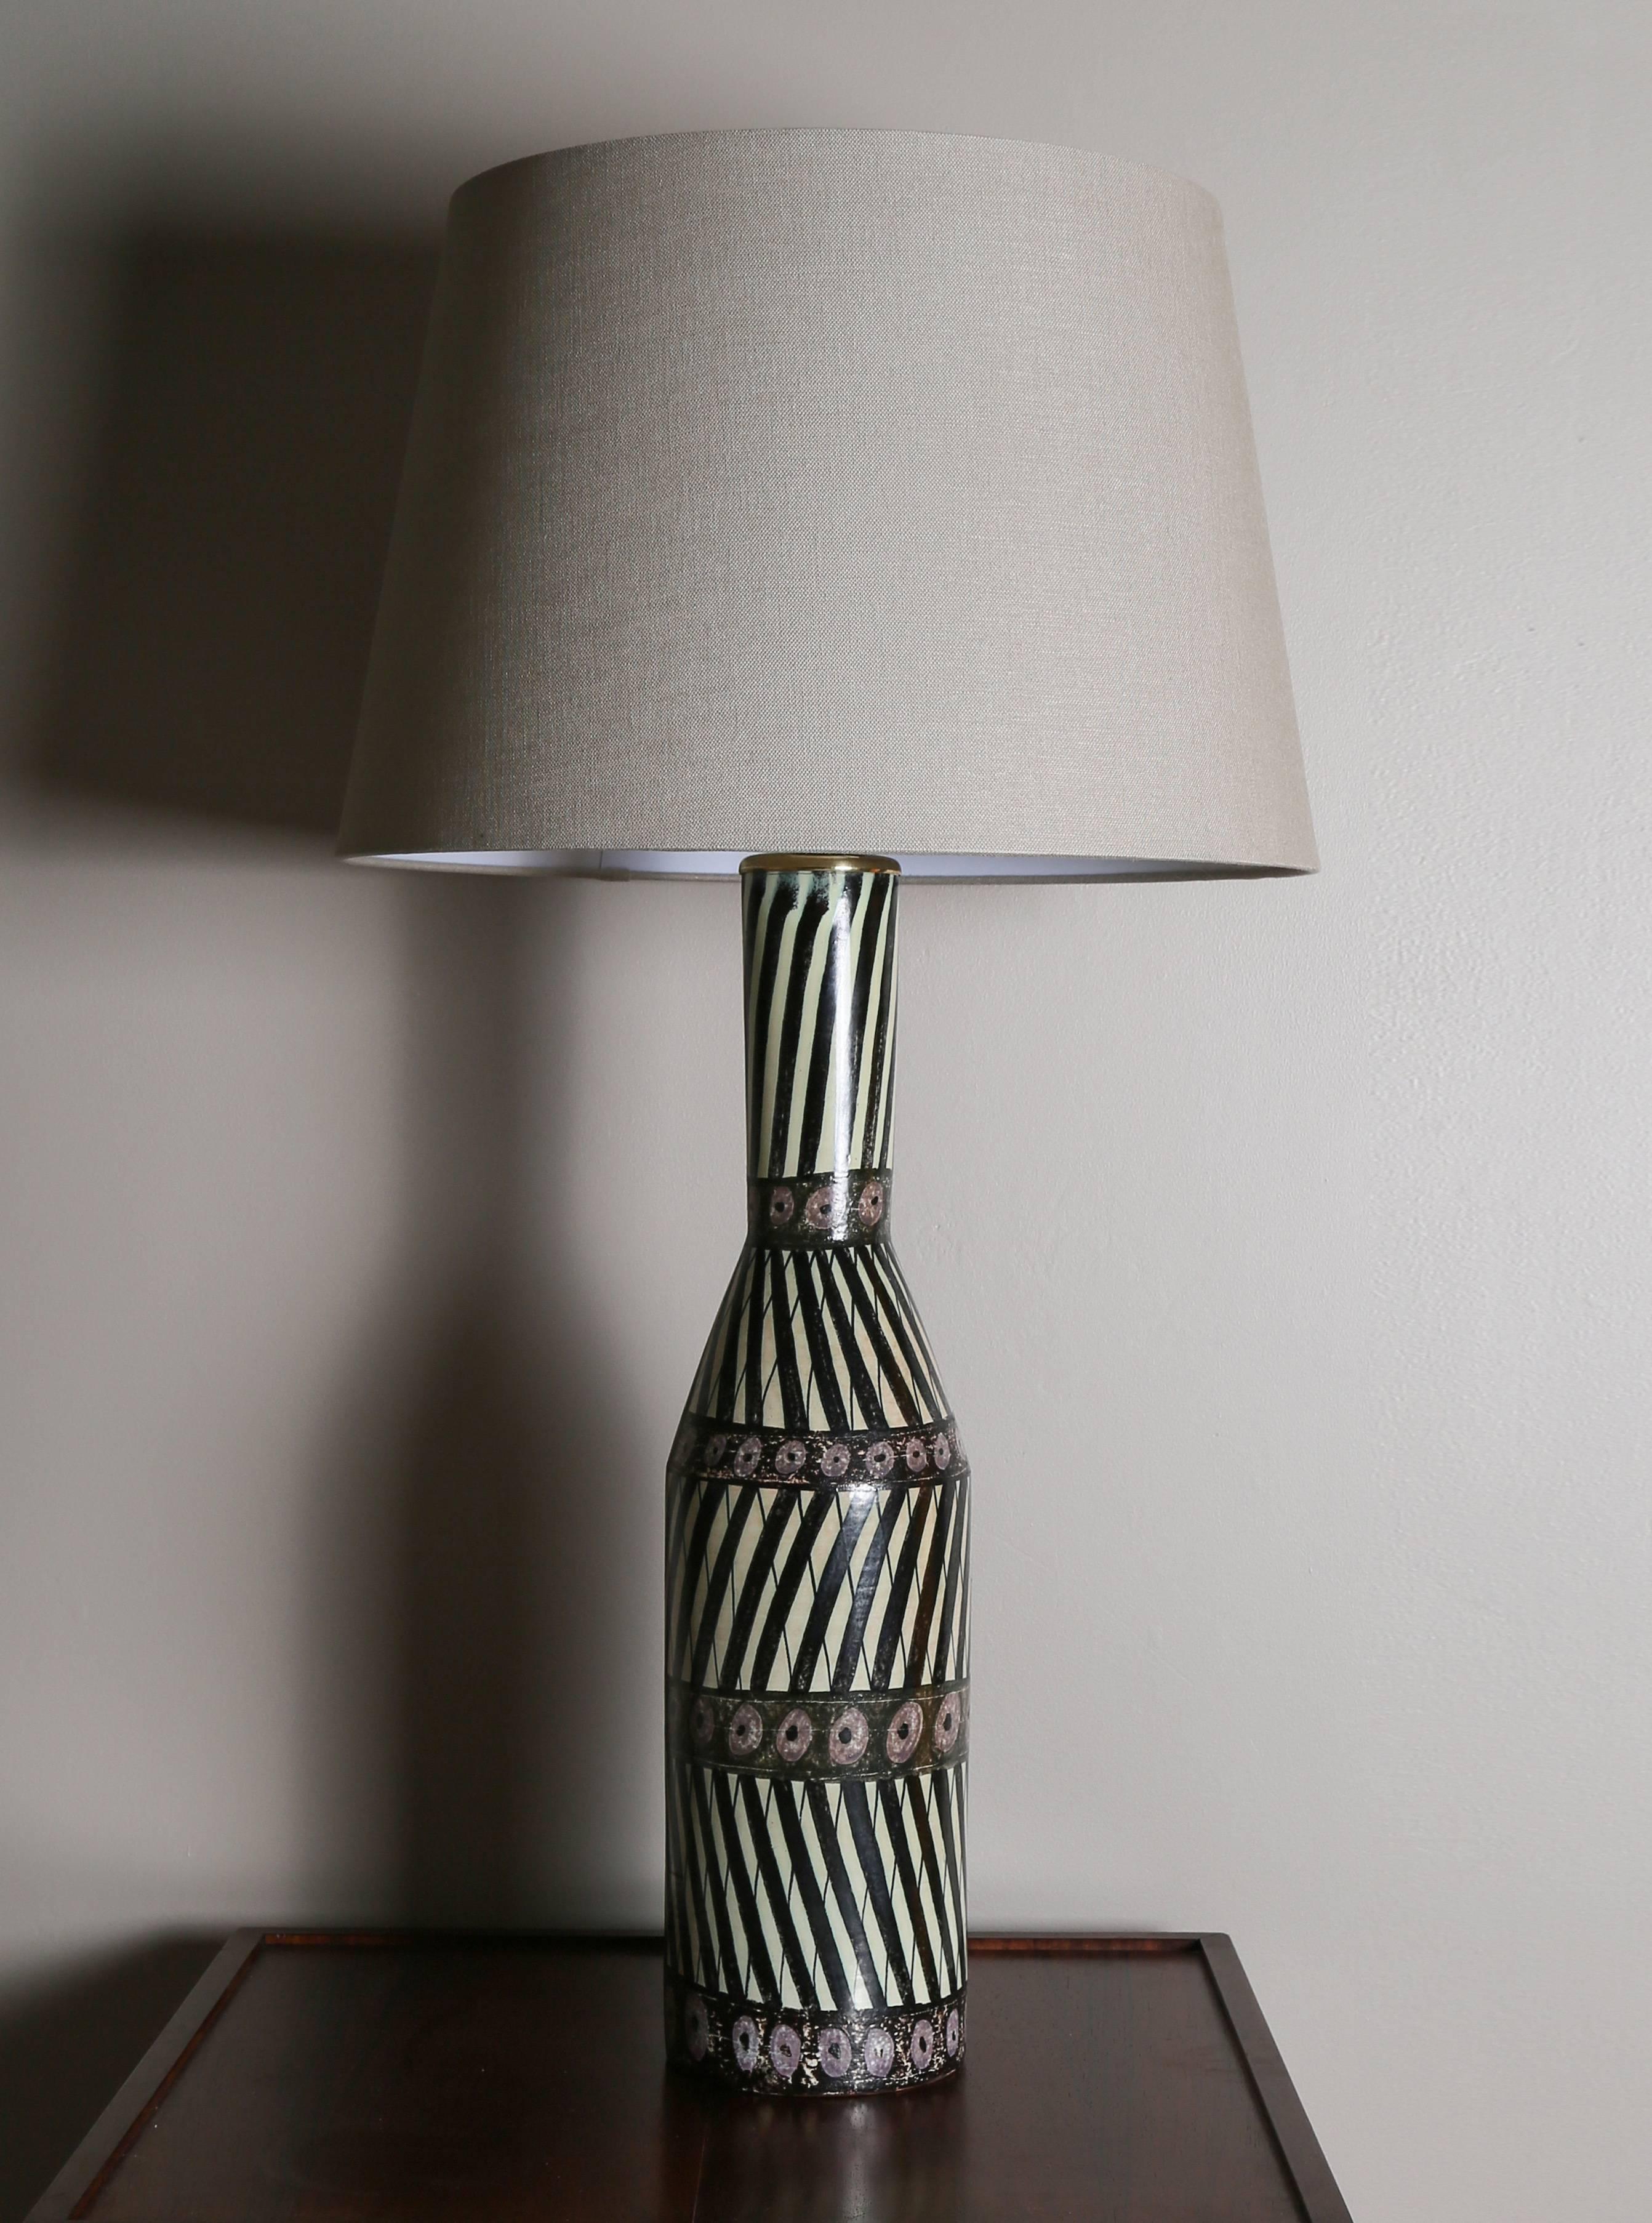 Large ceramic table lamp by Swedish ceramist Carl-Harry Stålhane in collaboration with Finnish designer Aune Laukkanen.

Sweden, circa 1955

Torro Faience-series

Possibly a unique piece manufactured by Rörstrand Ab

Glazed faience